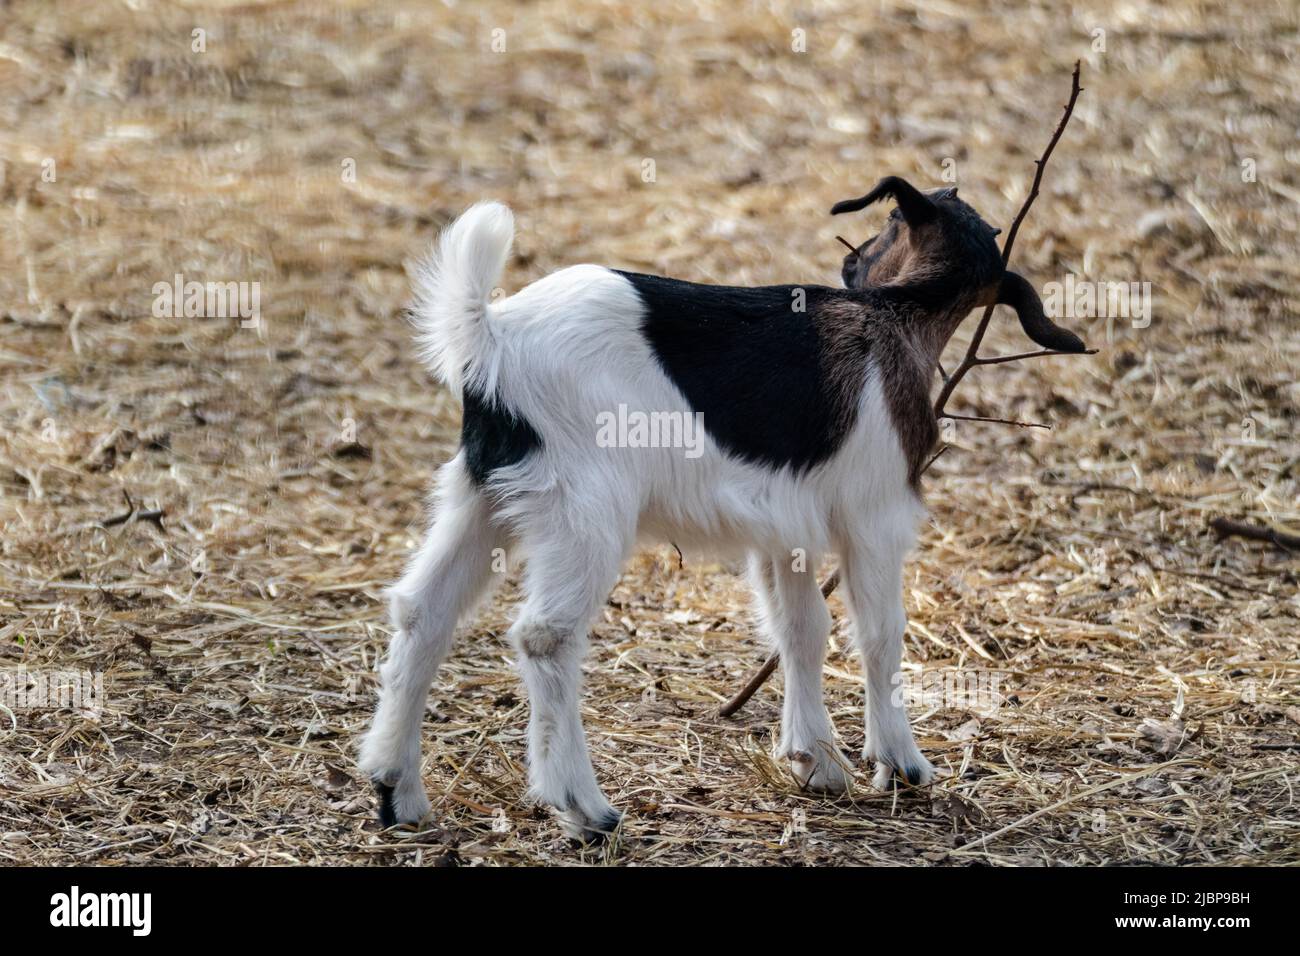 A cute colorful playful baby goat, kid playing with branches in hay on farm yard. Domestic animals breeding Stock Photo